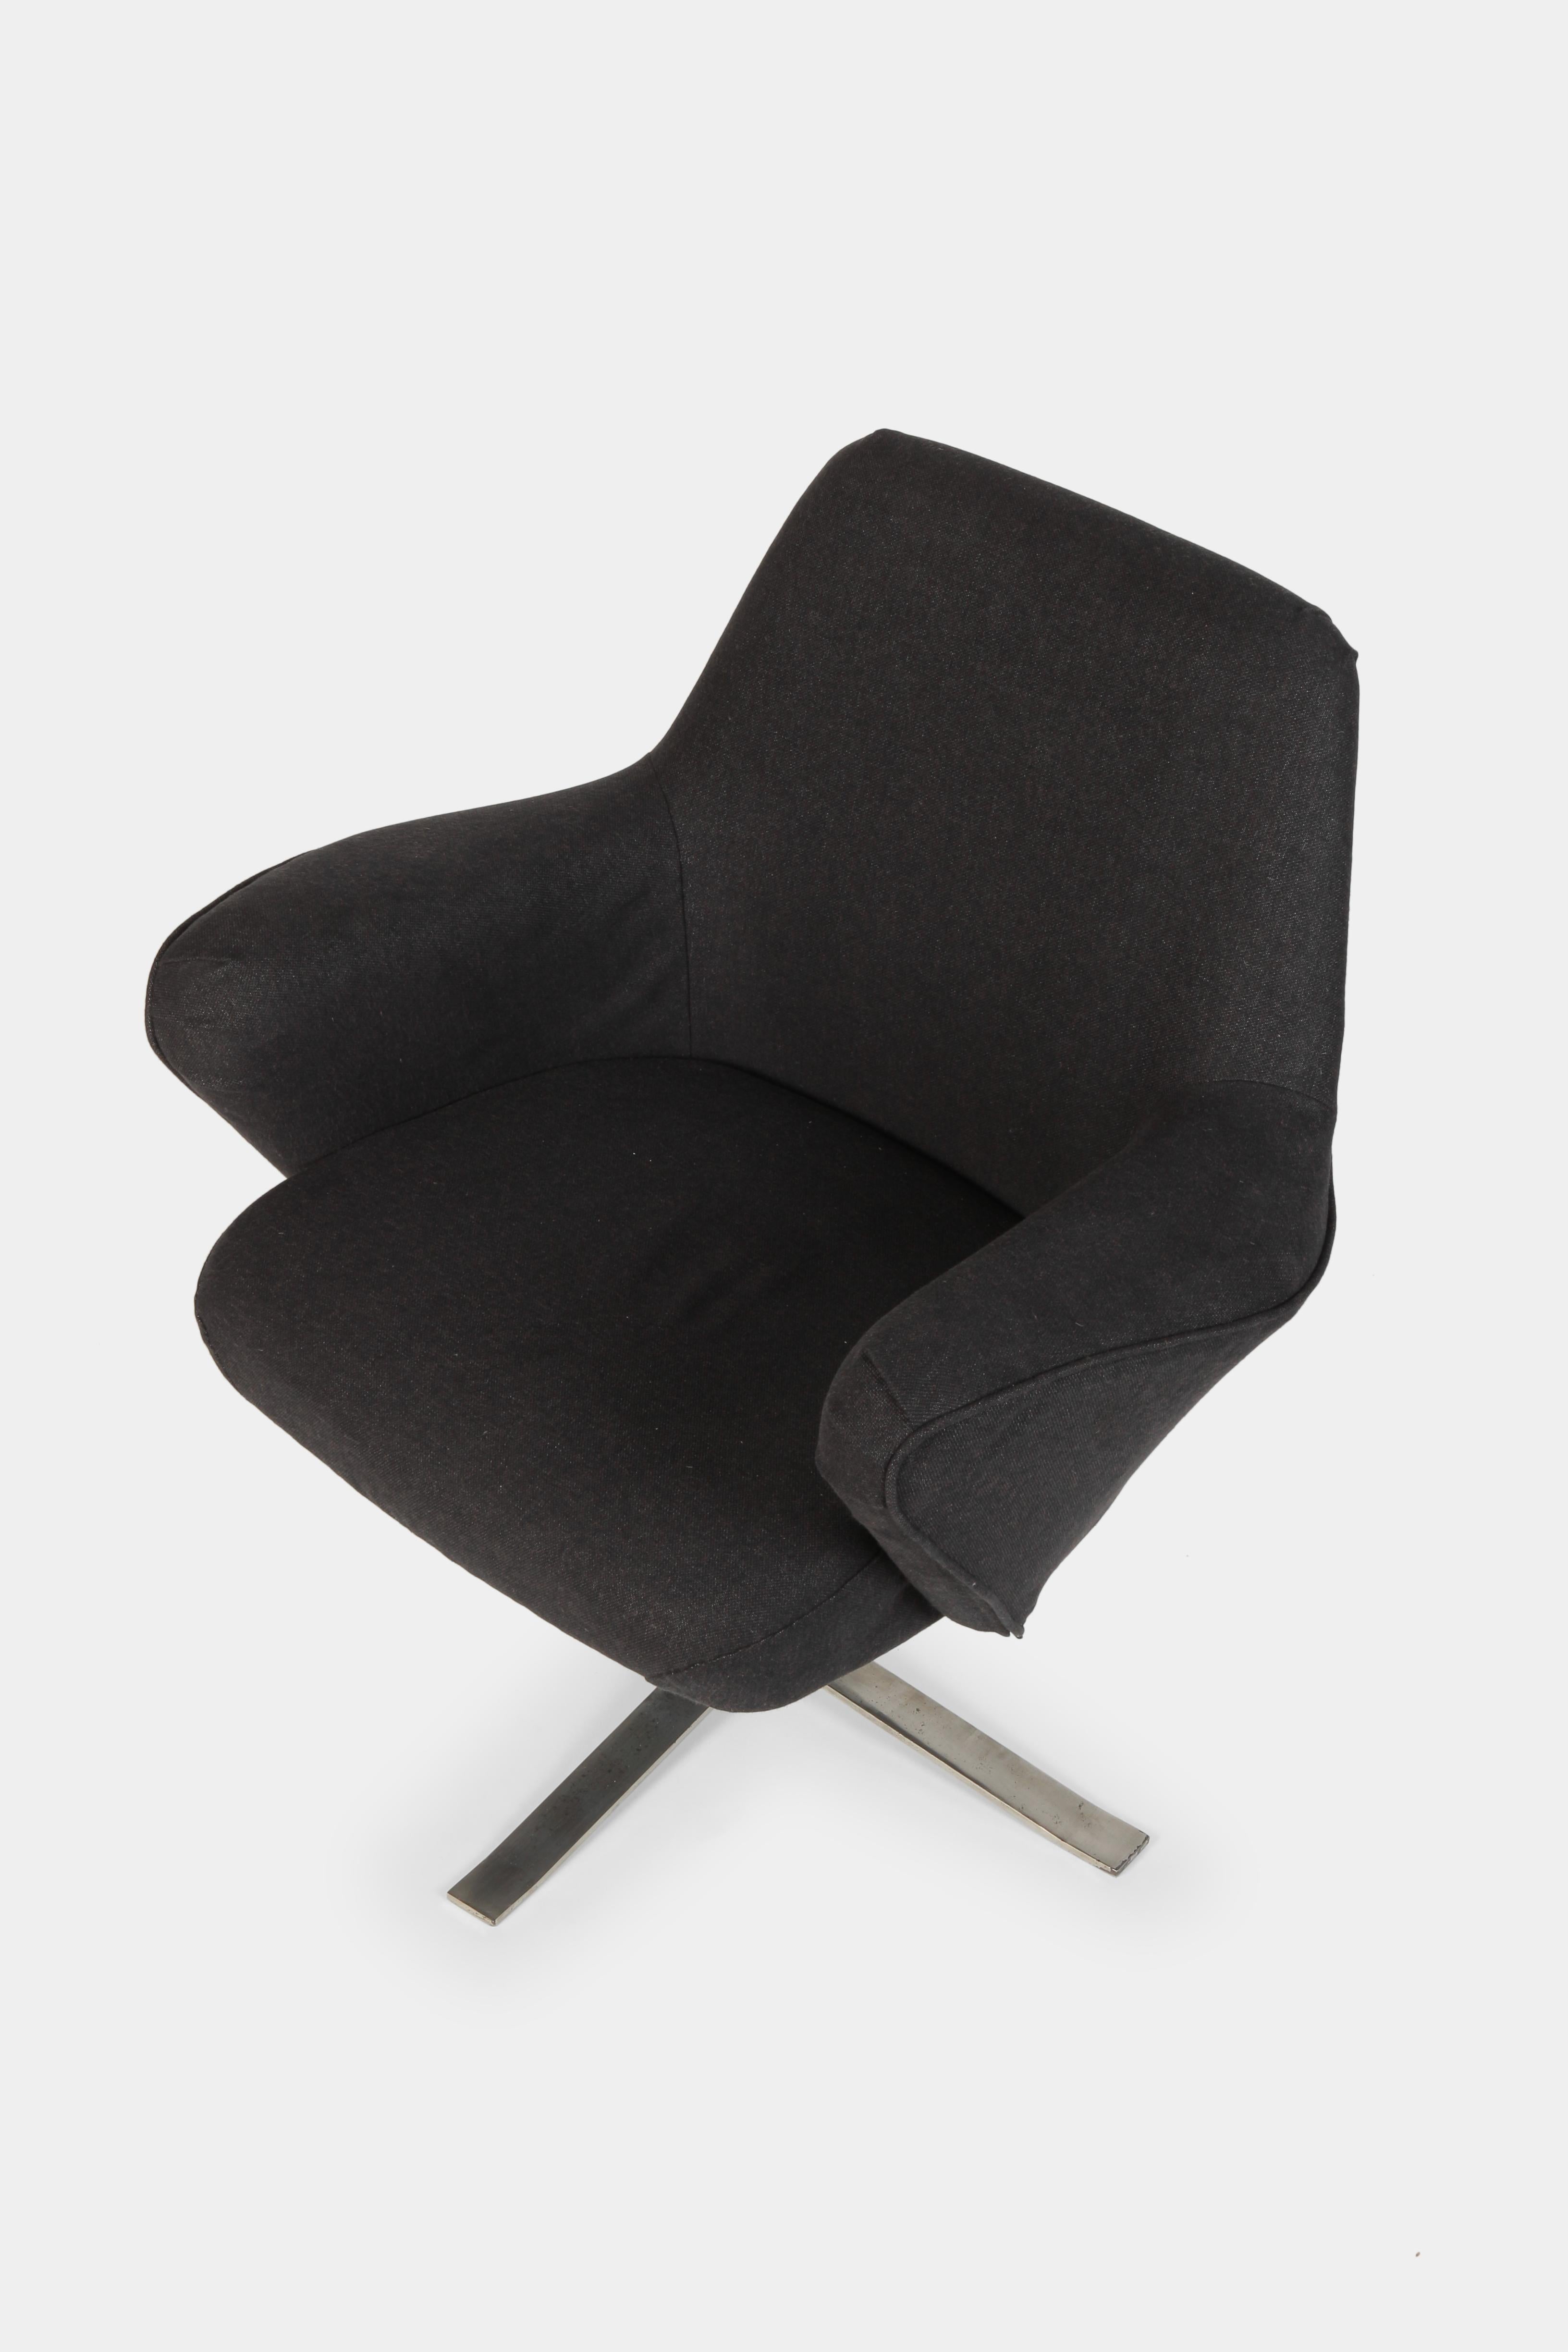 Mid-20th Century Giulio Moscatelli “Dolly” Lounge Chair Forma Nova, 1960s For Sale